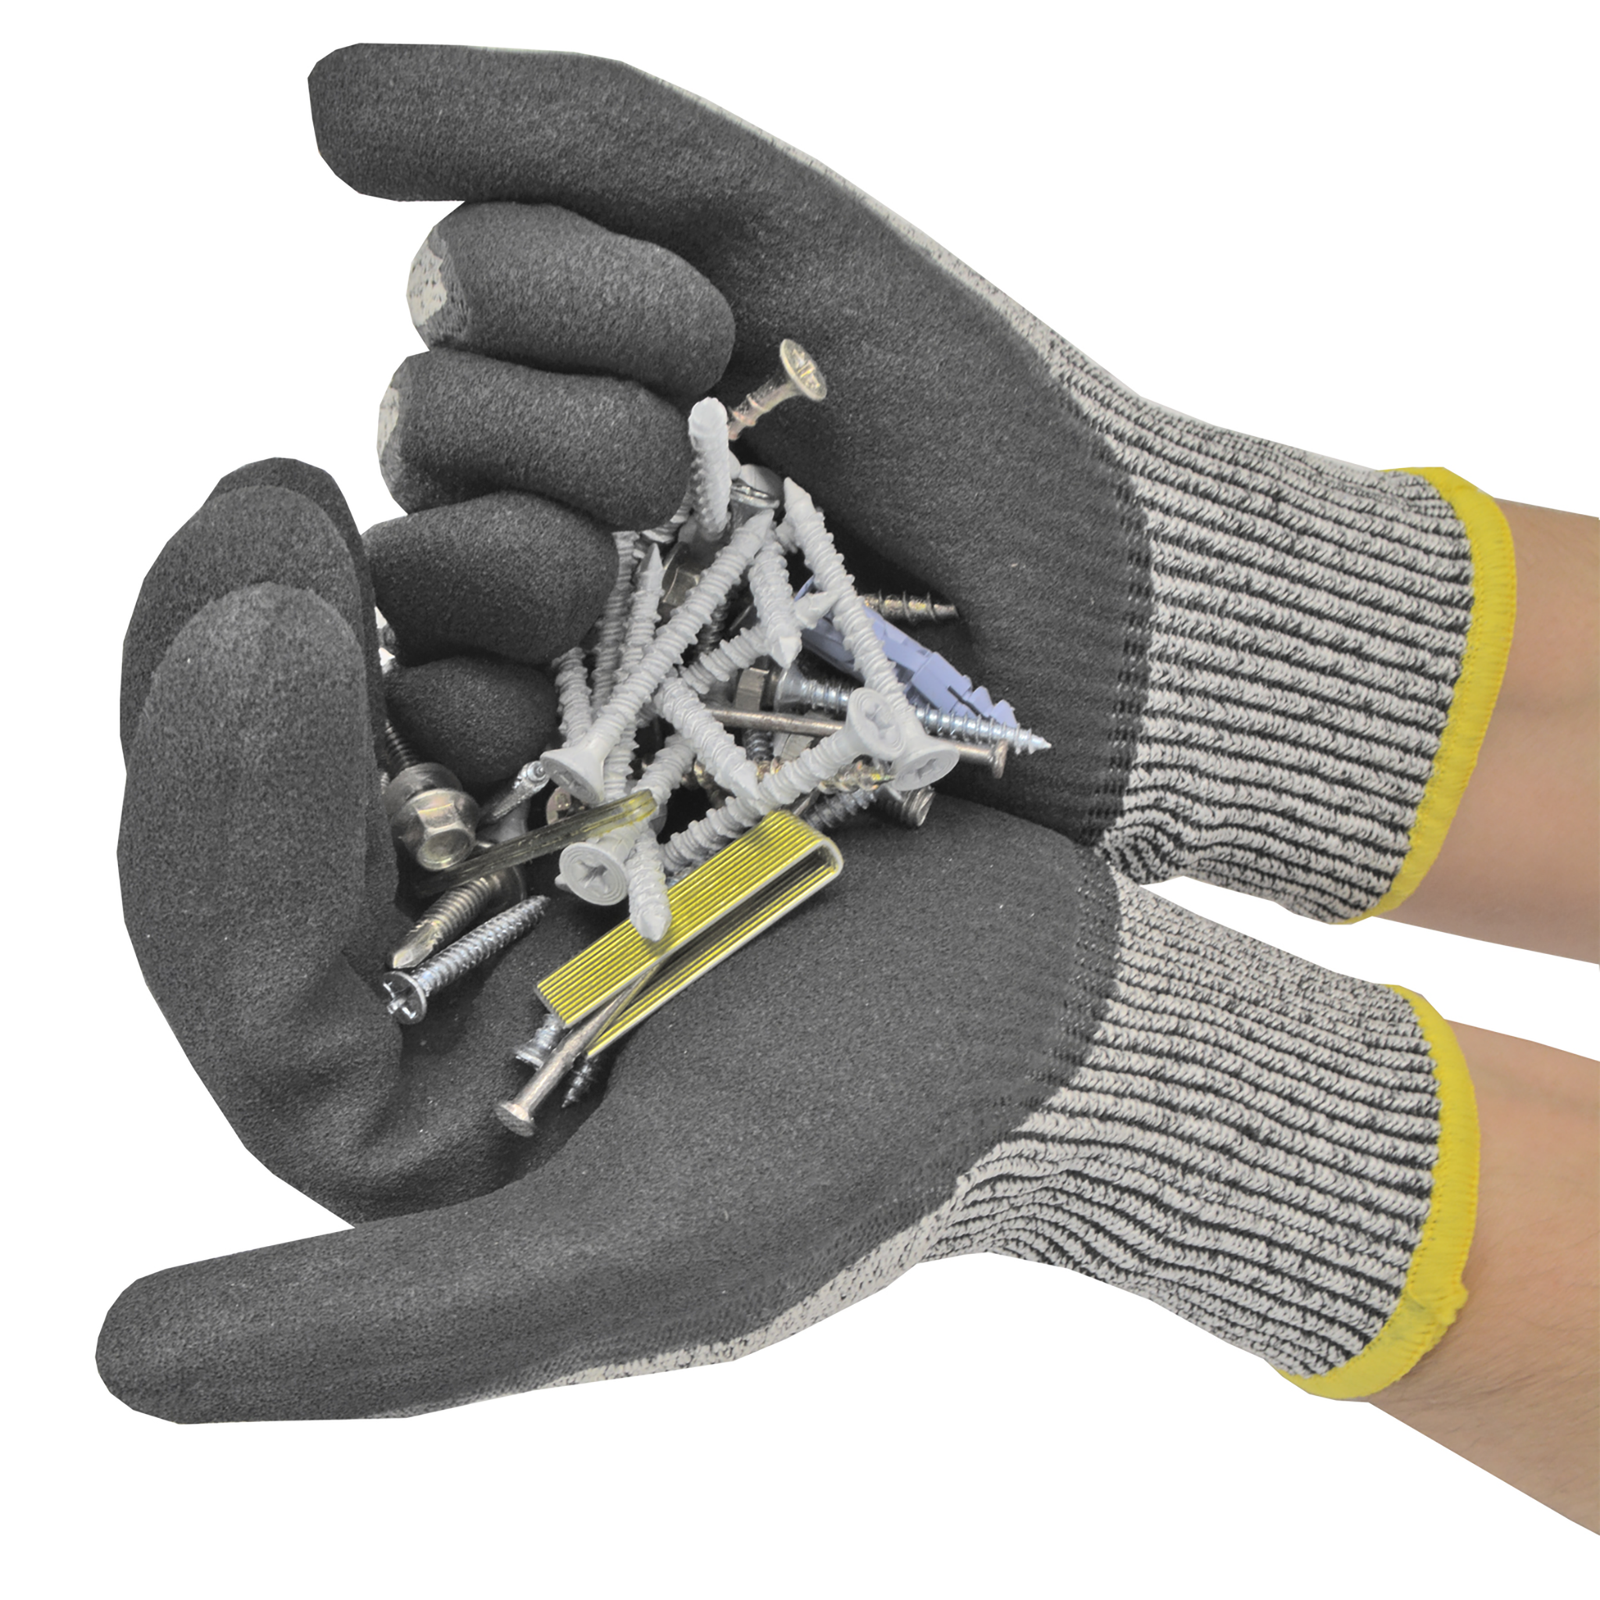 Two hands holding a large amount of nails and staples while wearing the cut resistant JORESTECH safety work gloves with black nitrile dipped palm